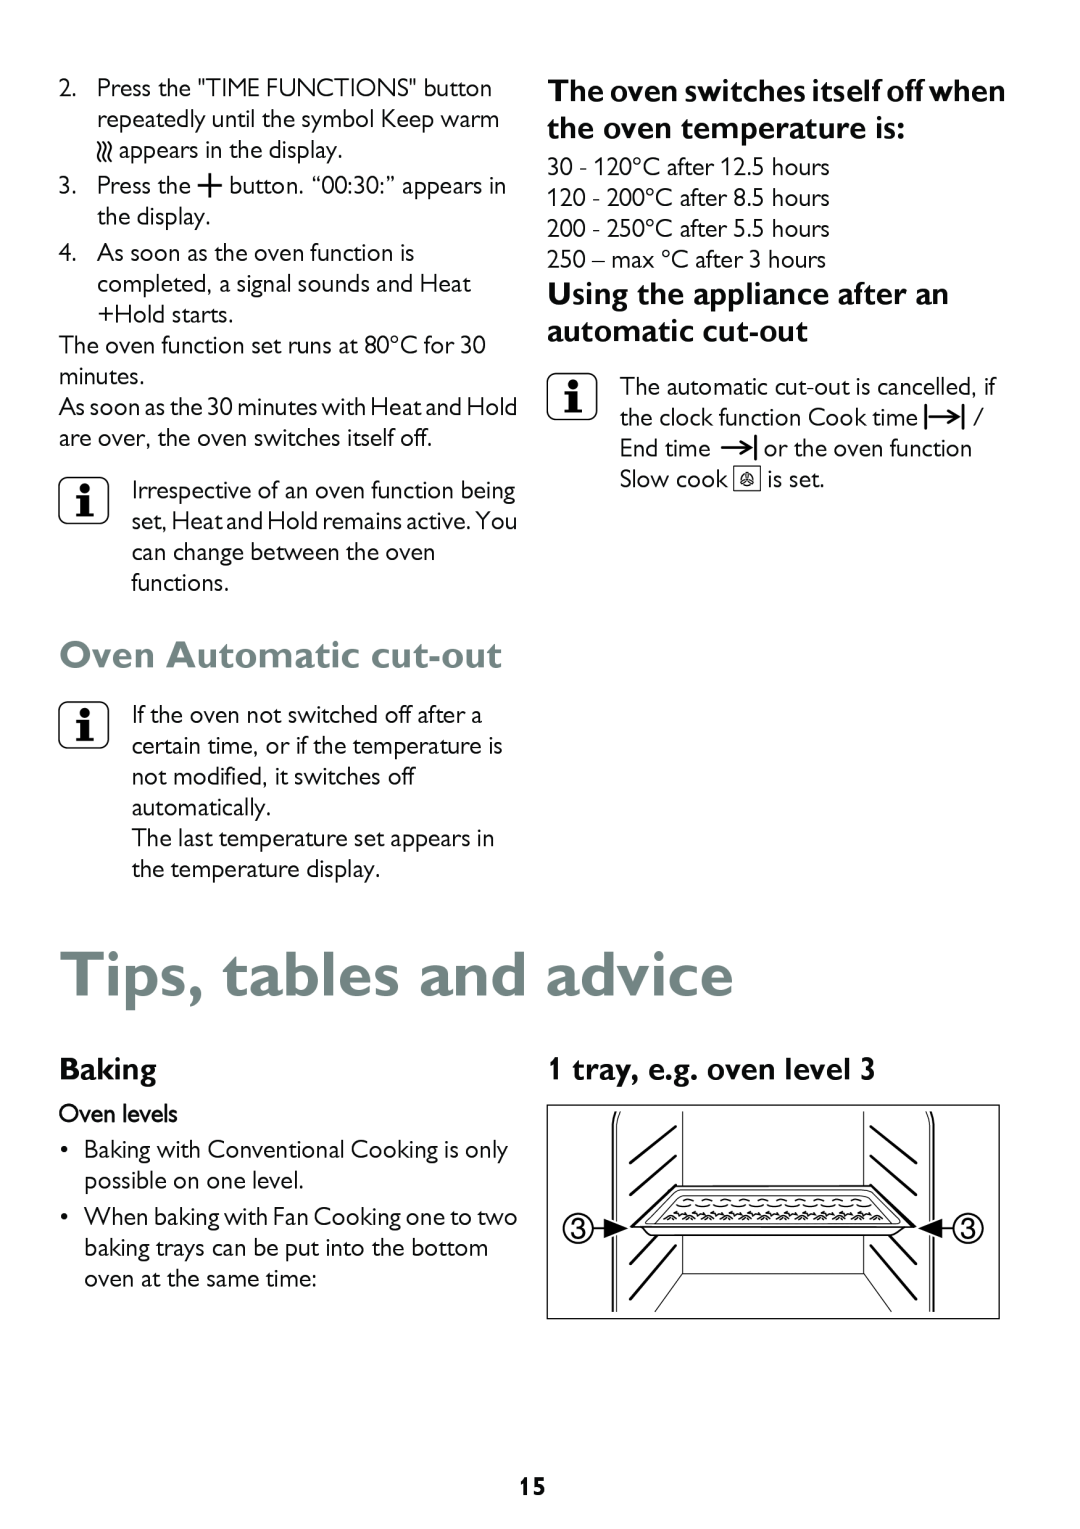 John Lewis JLBIDO913 Tips, tables and advice, Oven Automatic cut-out, Using the appliance after an automatic cut-out 